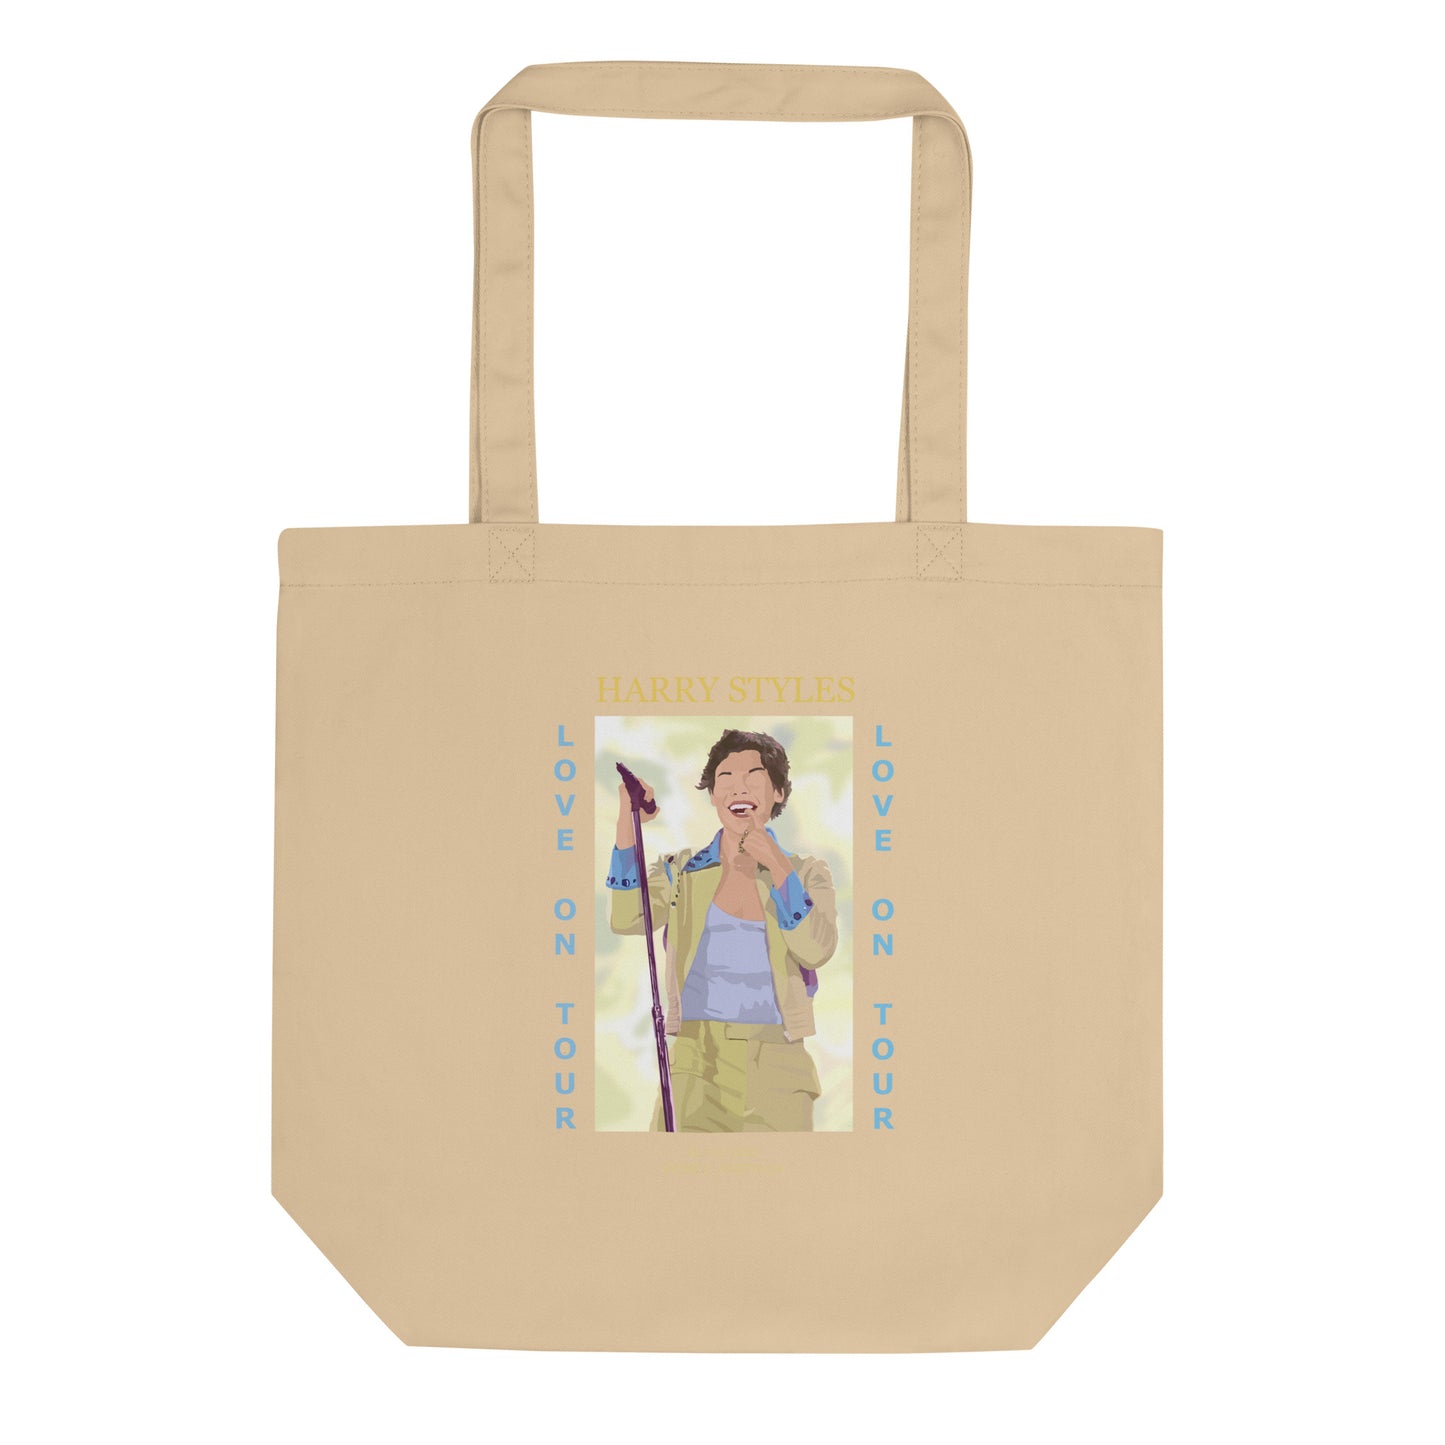 Harry Styles Love On Tour Sydney Night 1 - Eco Tote Bag